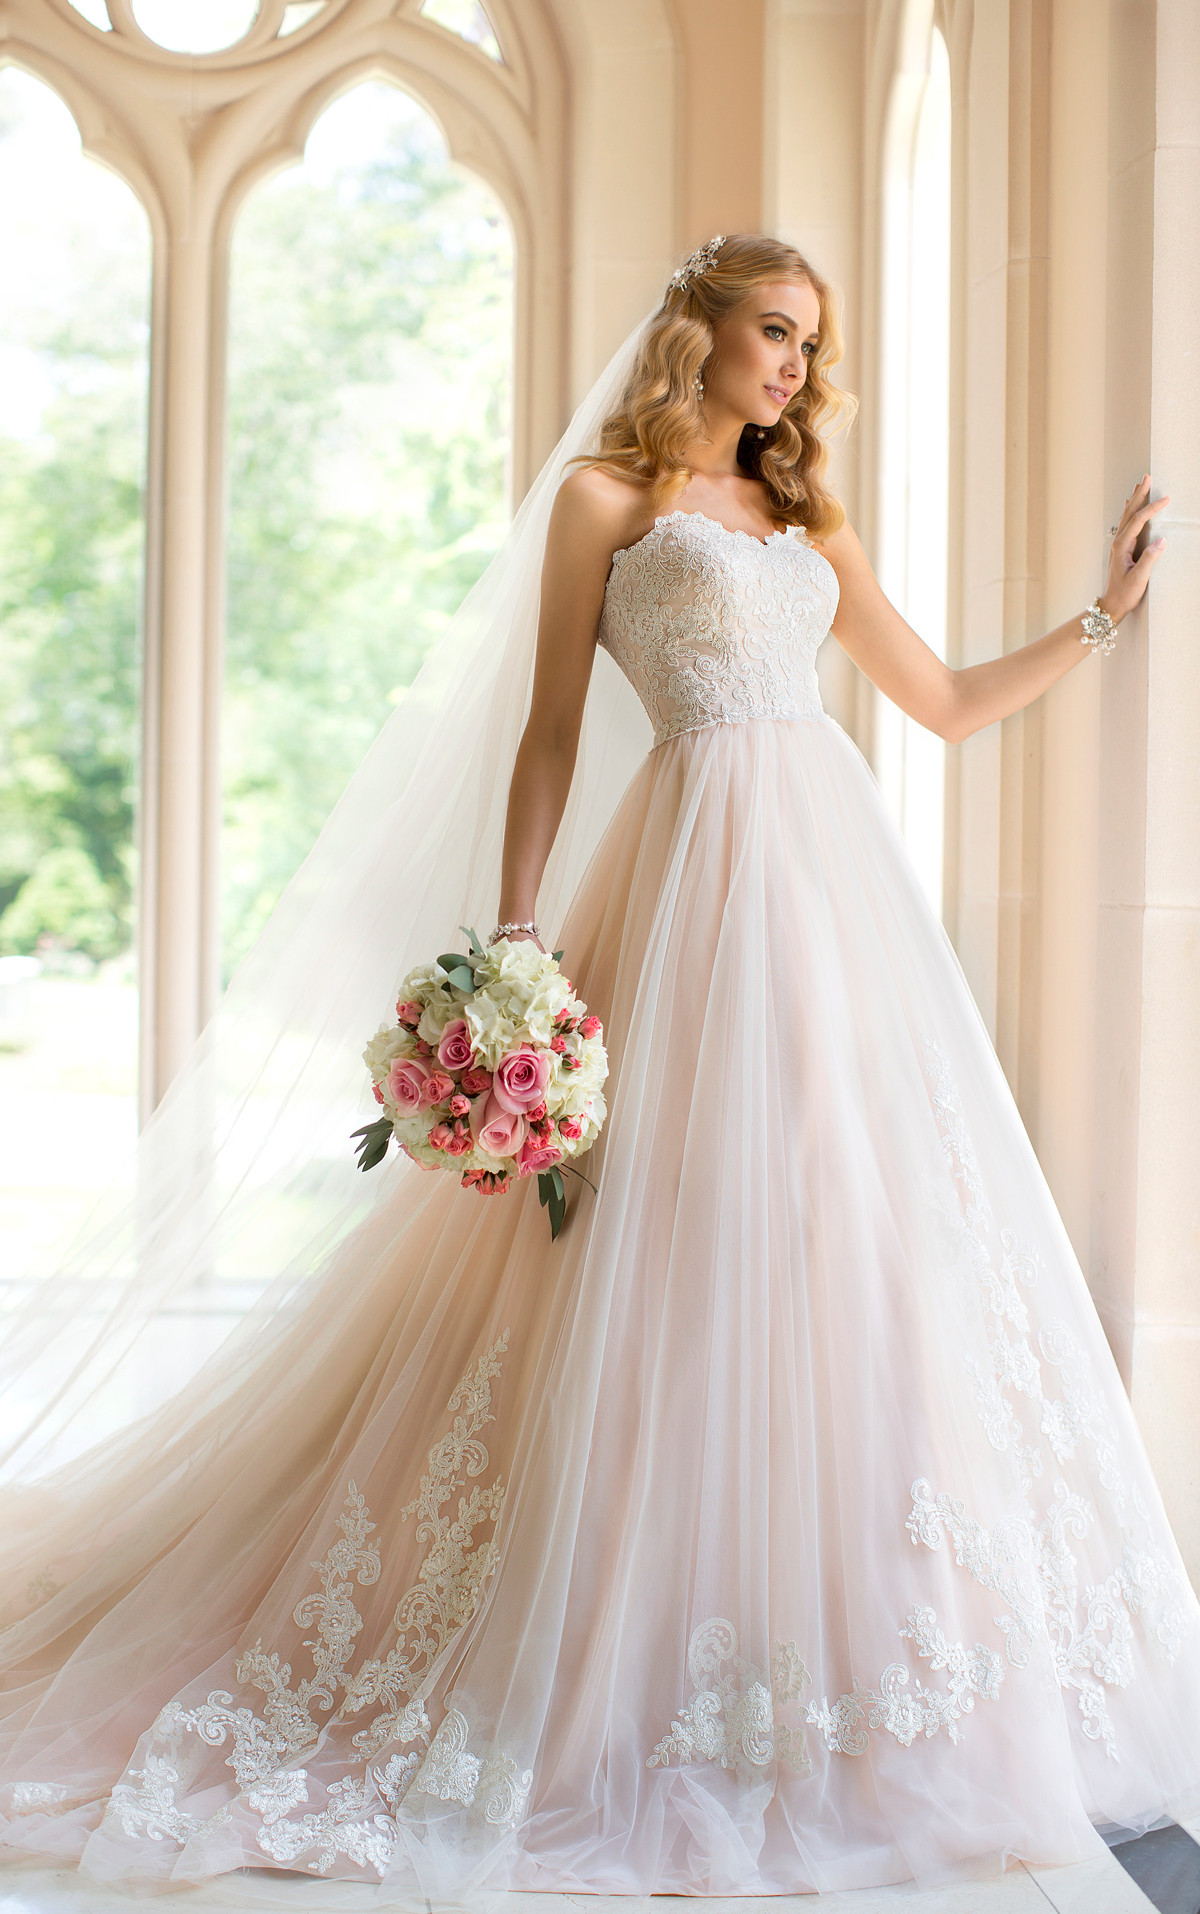 Wedding Gown Designer
 The Best Gowns from The Most In Demand Wedding Dress